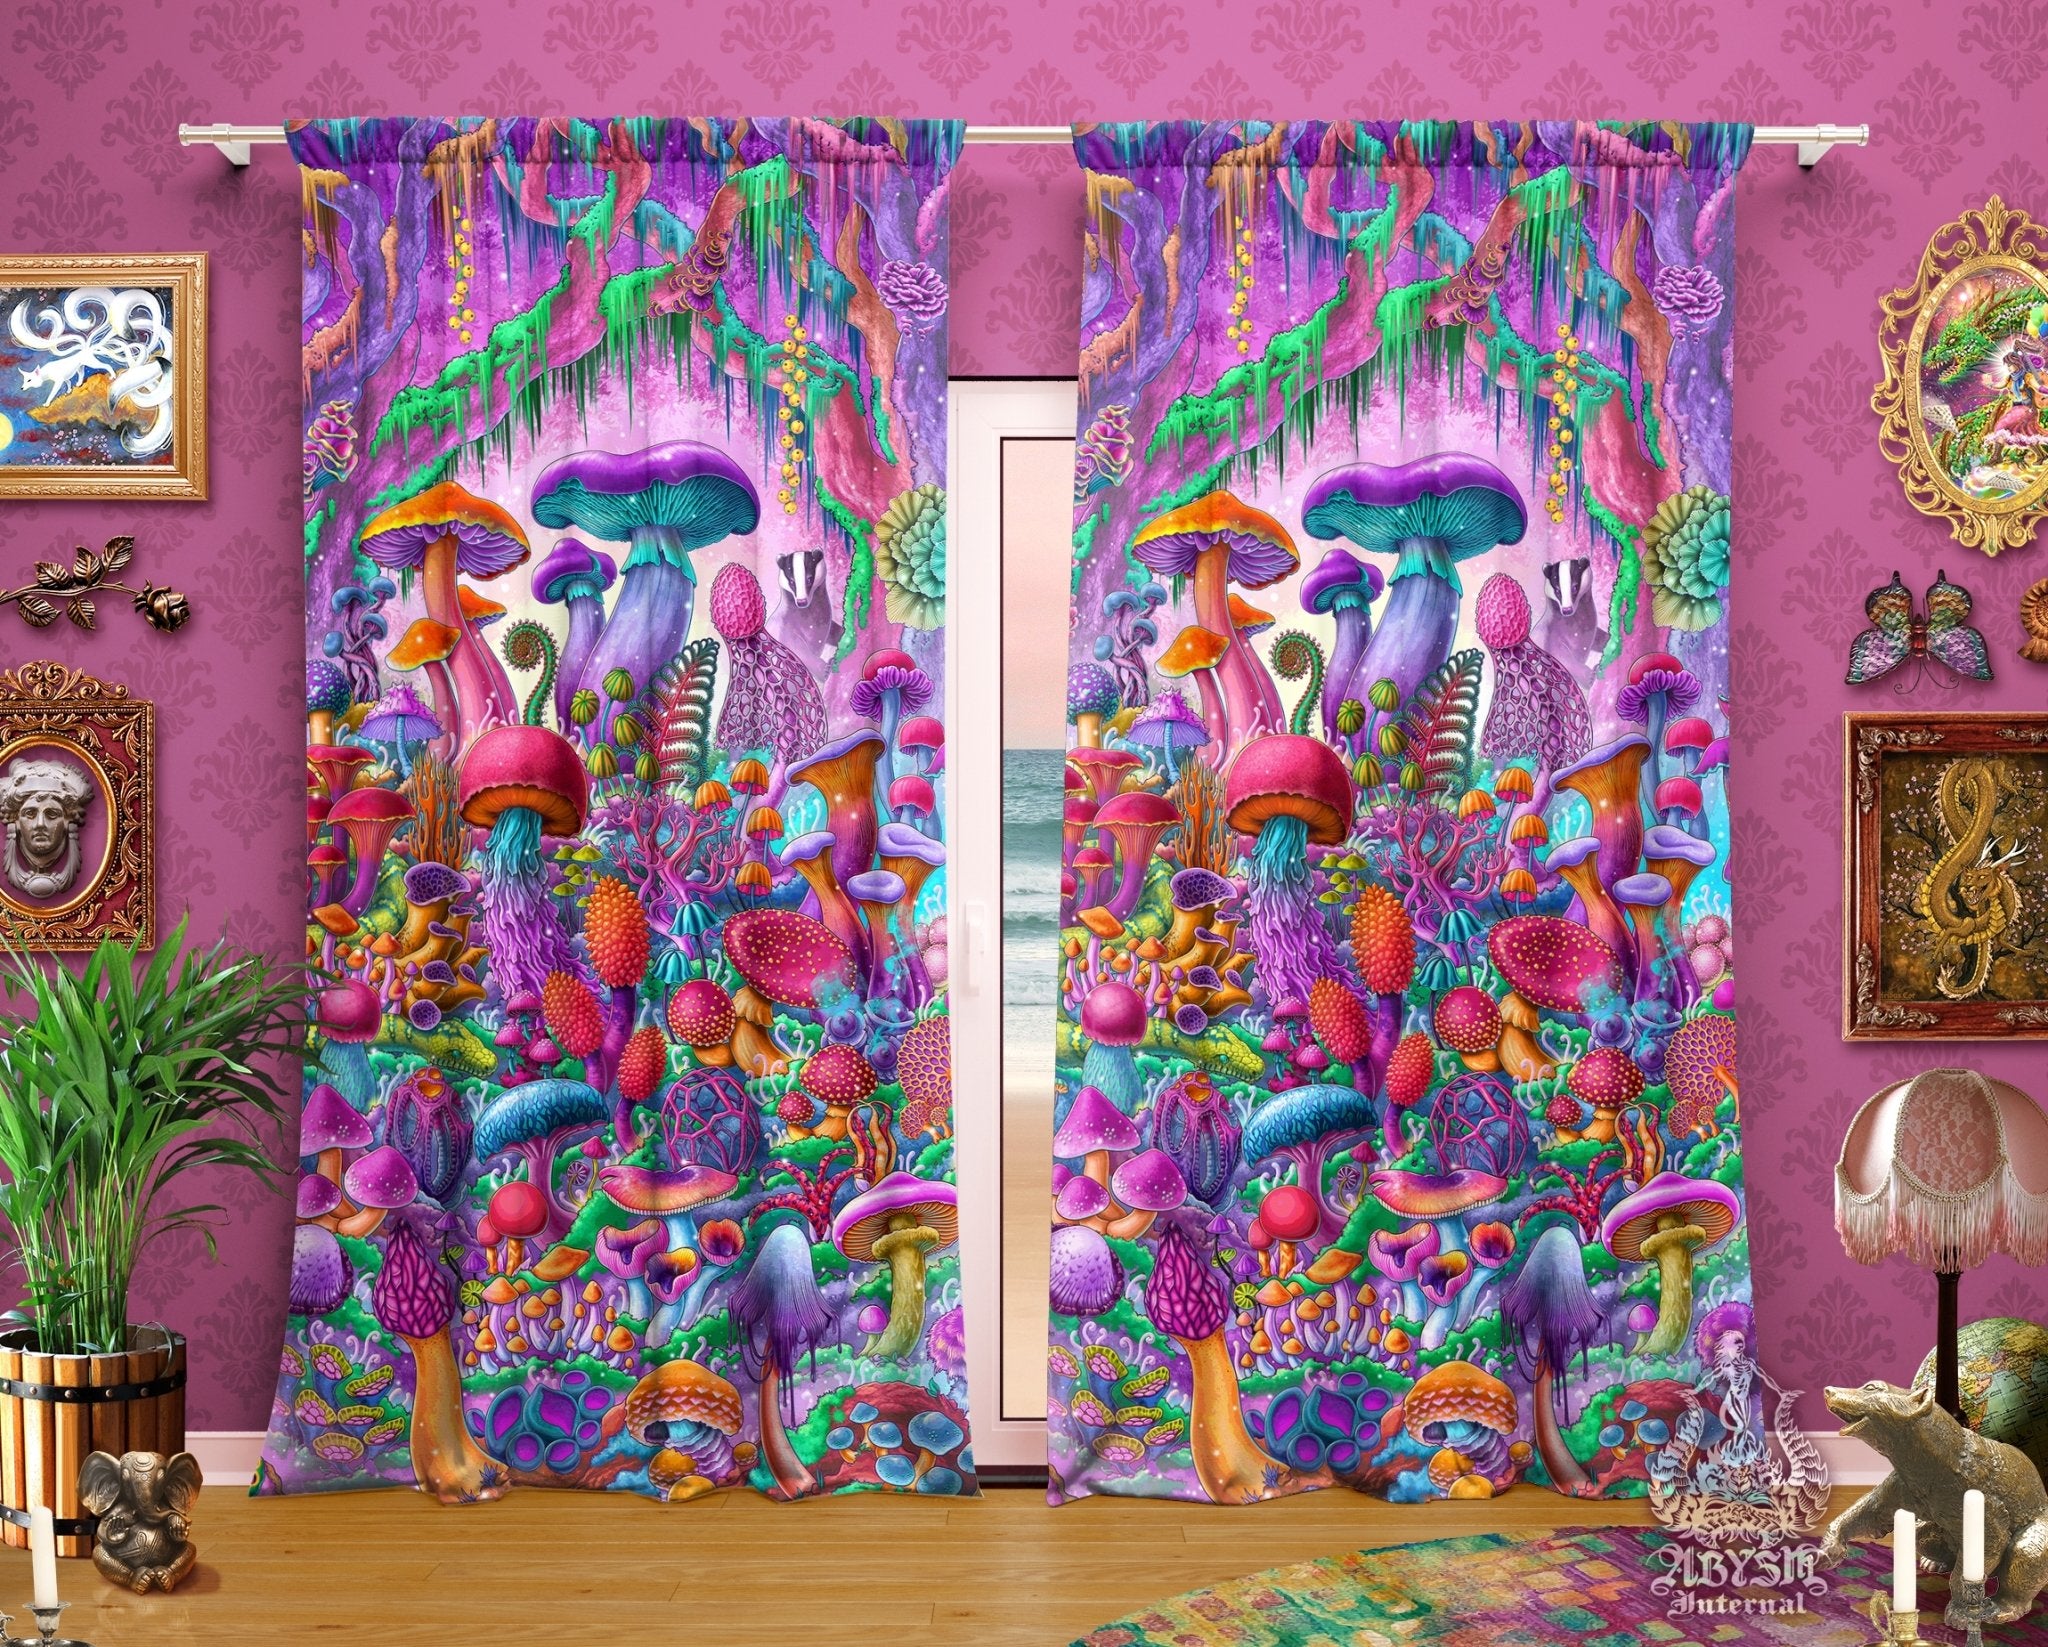 Pastel Mushrooms Blackout Curtains, Long Window Panels, Psychedelic Art Print, Girly Kids Room Decor, Aesthetic Gamer Home and Shop Decor - Magic Shrooms - Abysm Internal